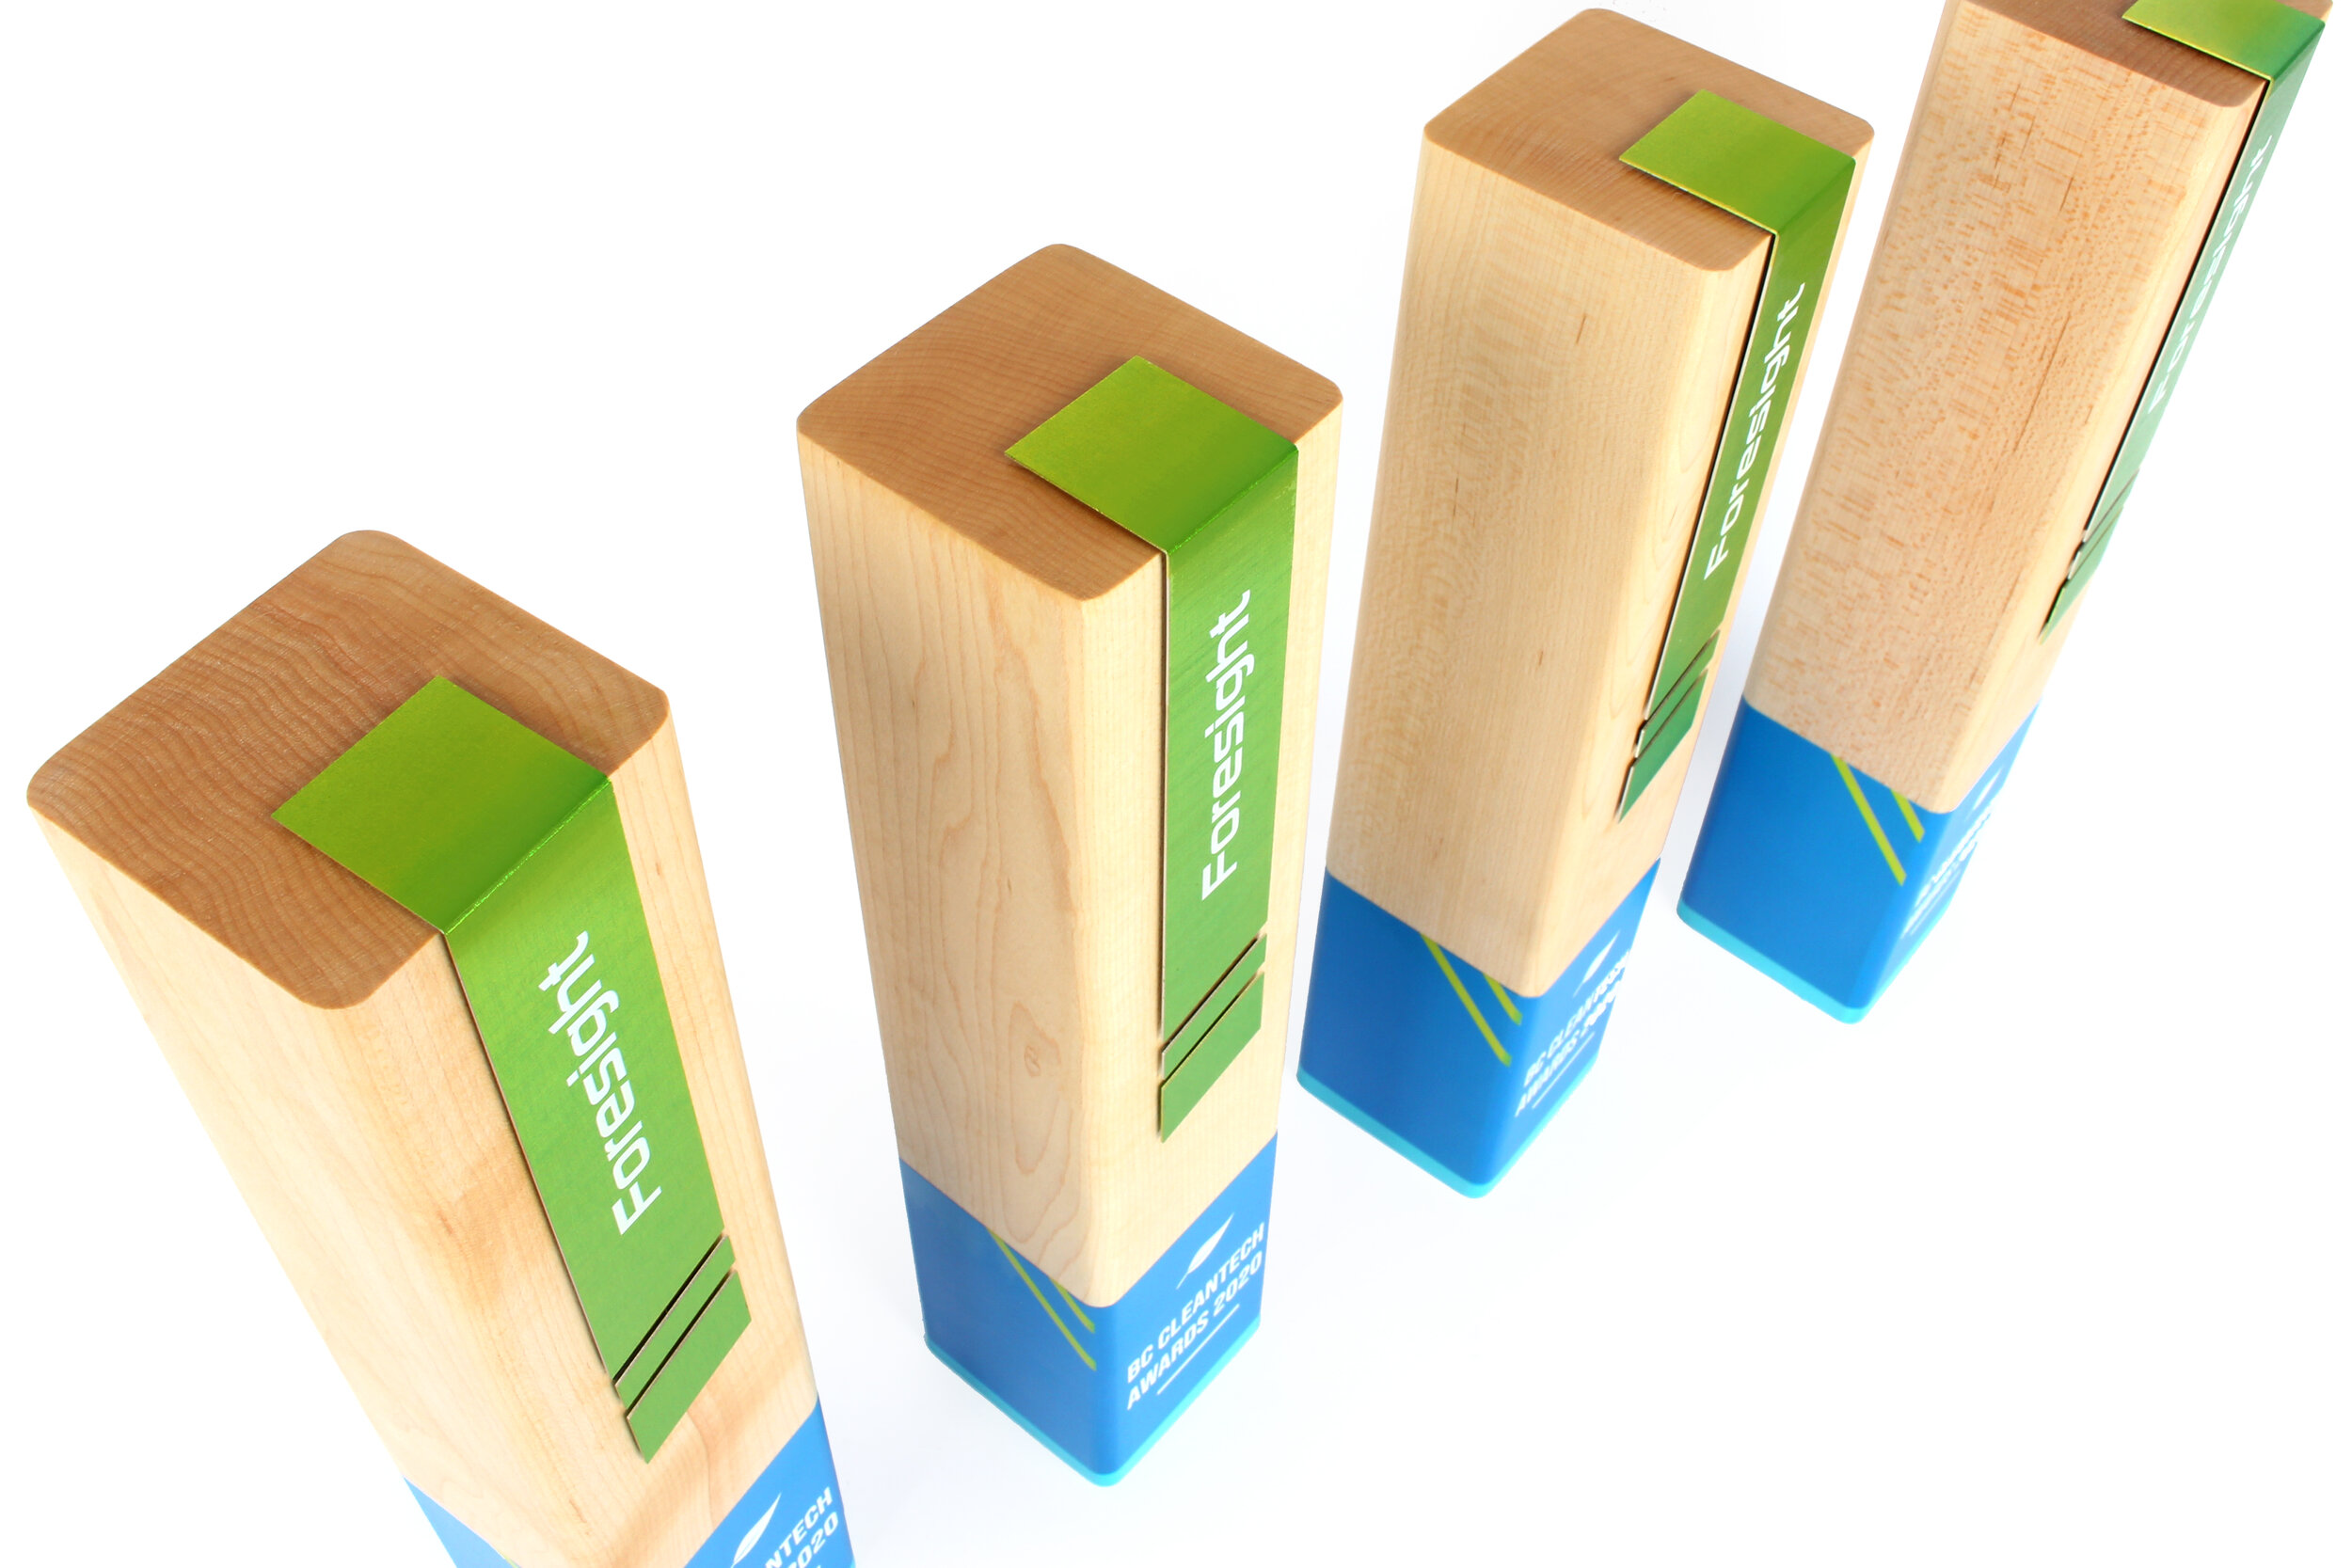 BC Cleantech_simple modern wood awards handcrafted from bamboo_custom corporate trophies  4